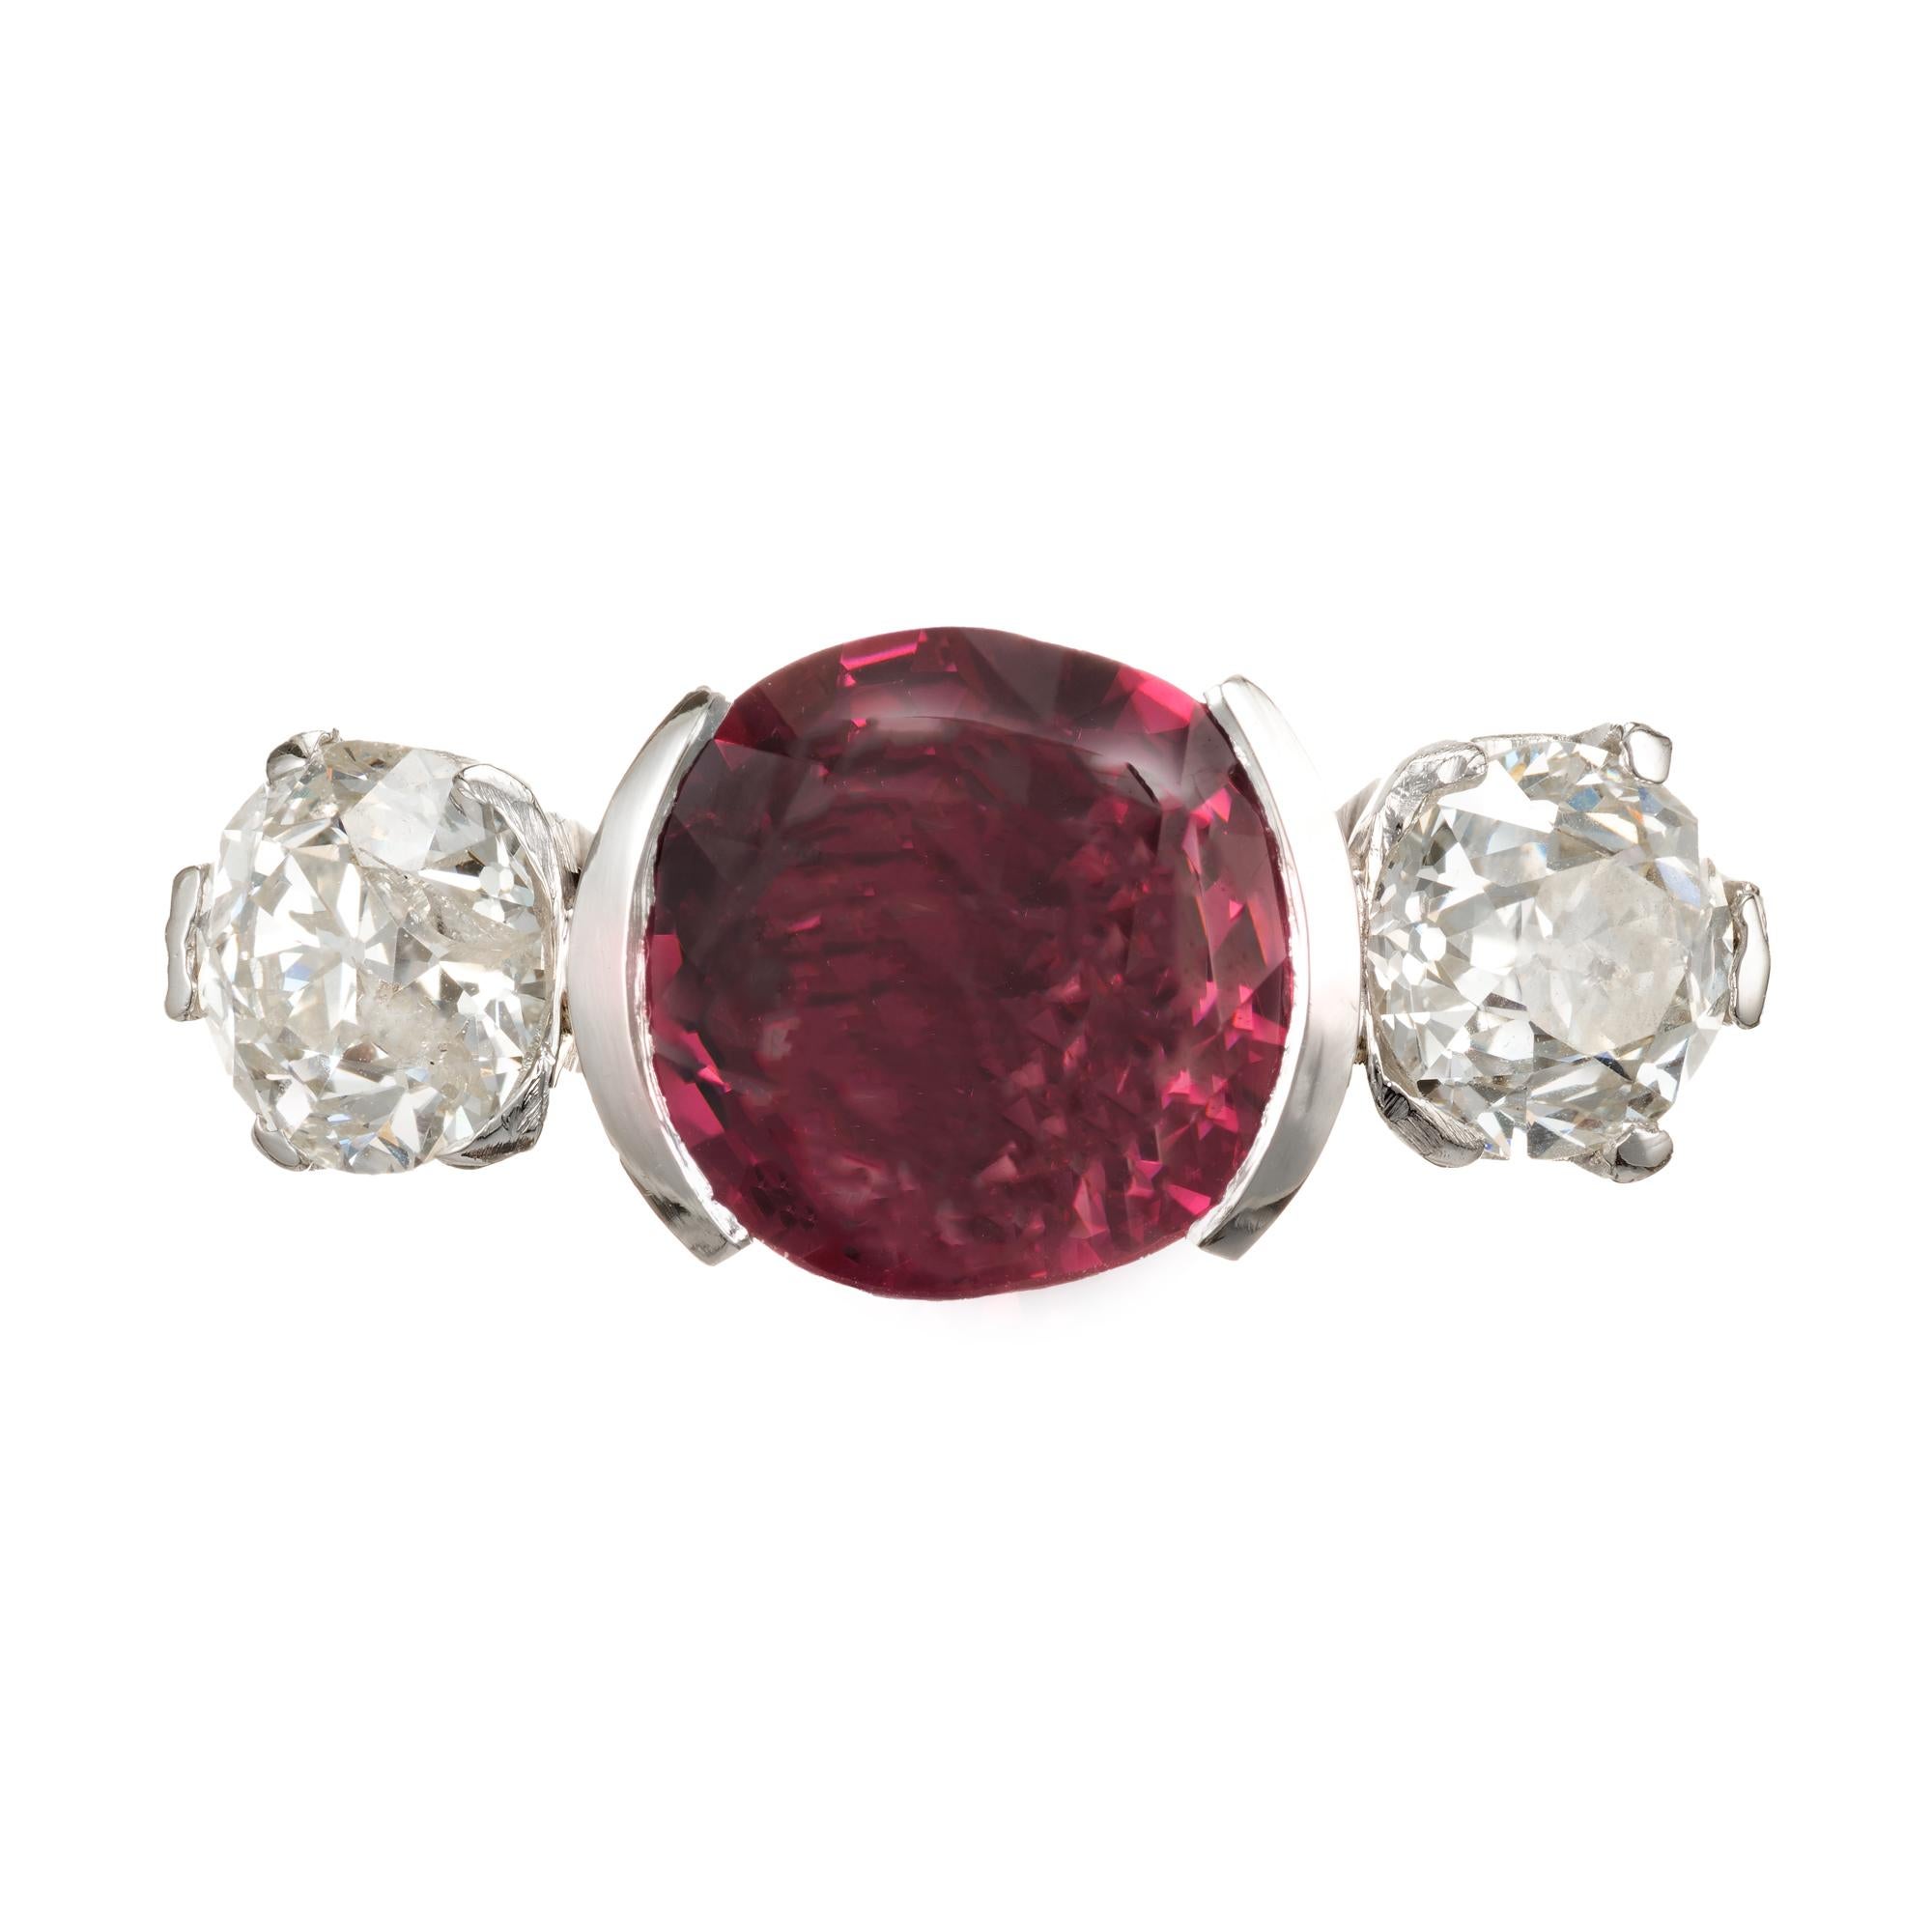 1920's Spinel and diamond three-stone engagement ring. Cushion cut pink Spinel half bezel set center stone with two old mine brilliant cut side diamonds. GIA certified no heat Spinel of 3.75cts of old cut.

1 cushion purplish pink Spinel, approx.